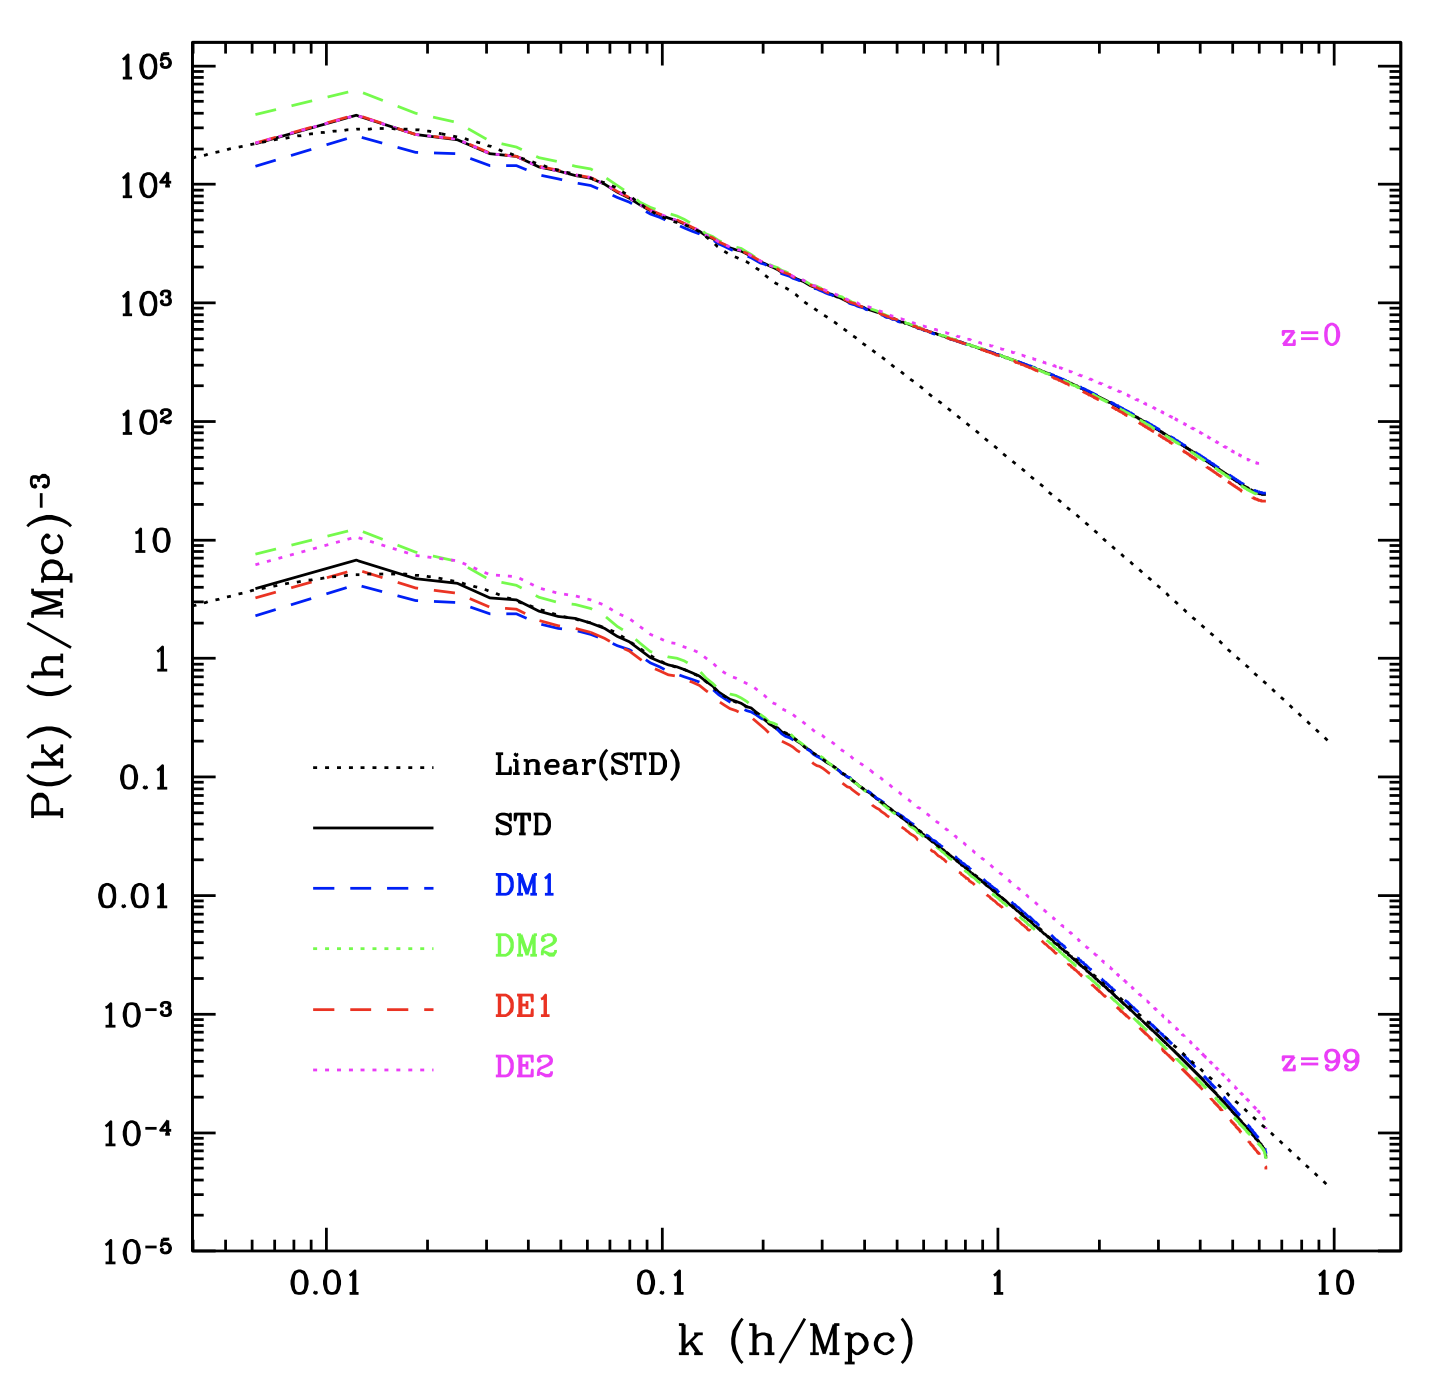 Constraining cosmology with big data statistics of cosmological graphs